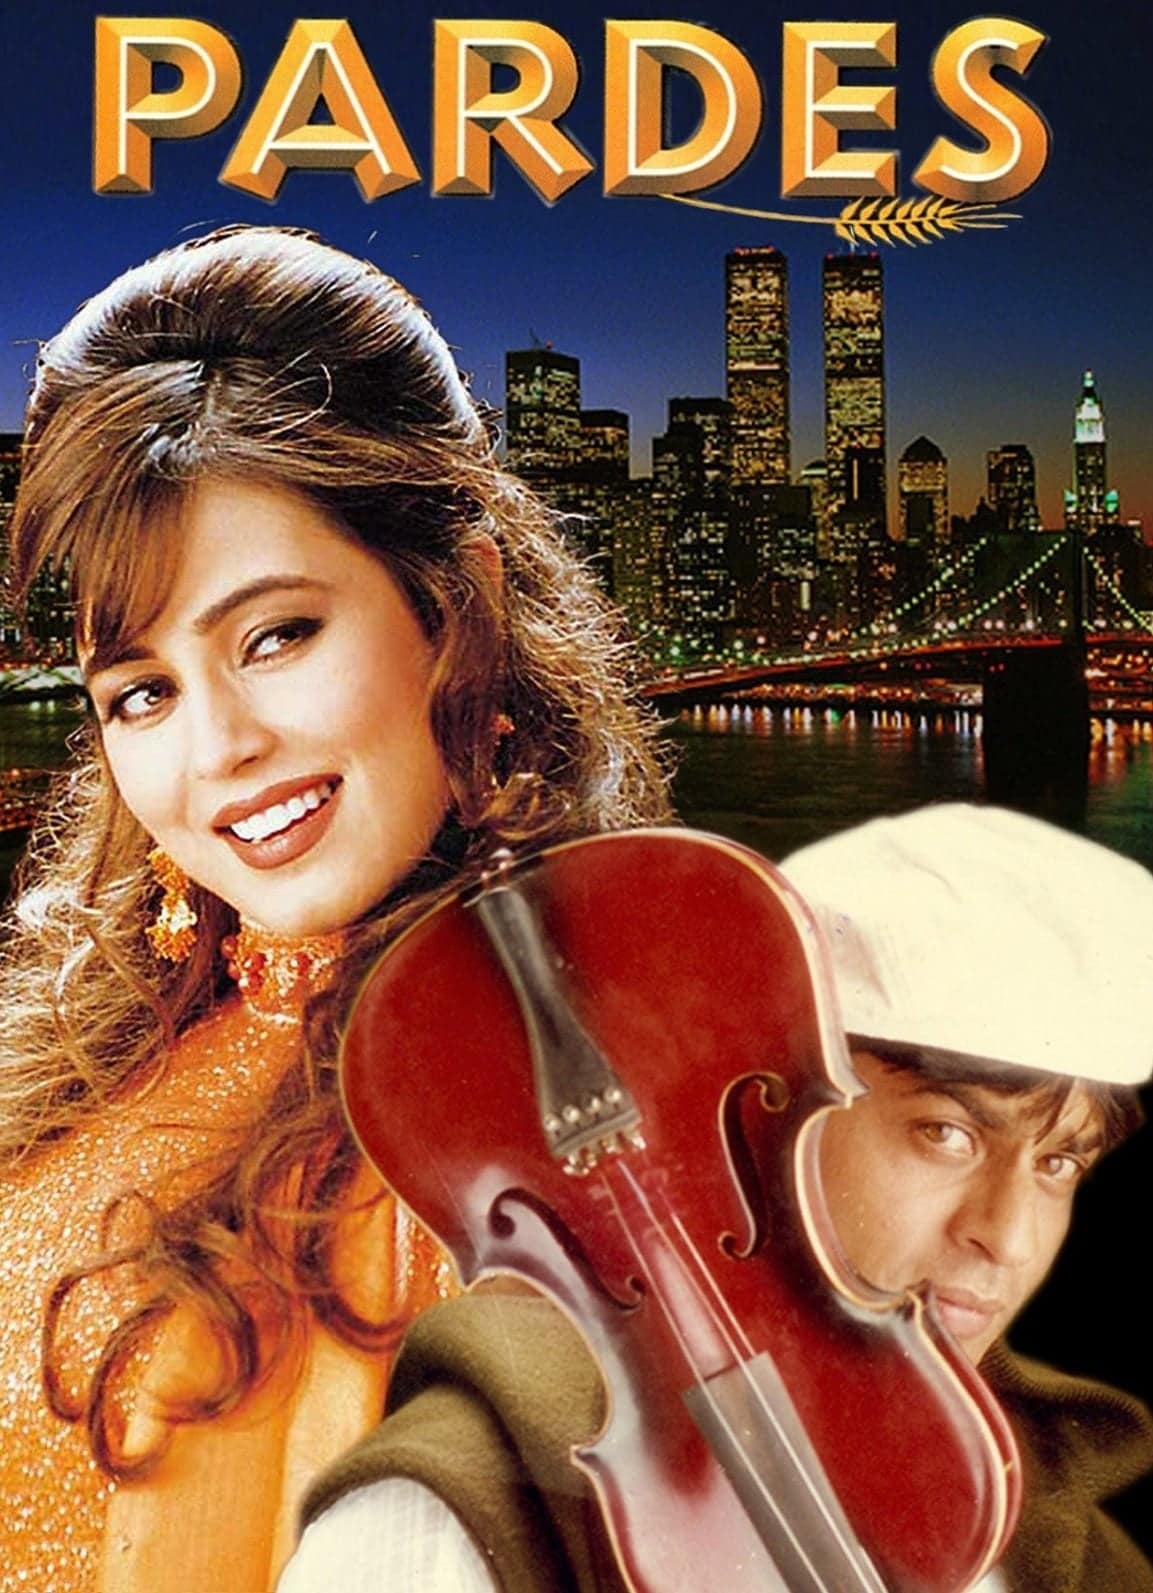 Poster for the movie "Pardes"